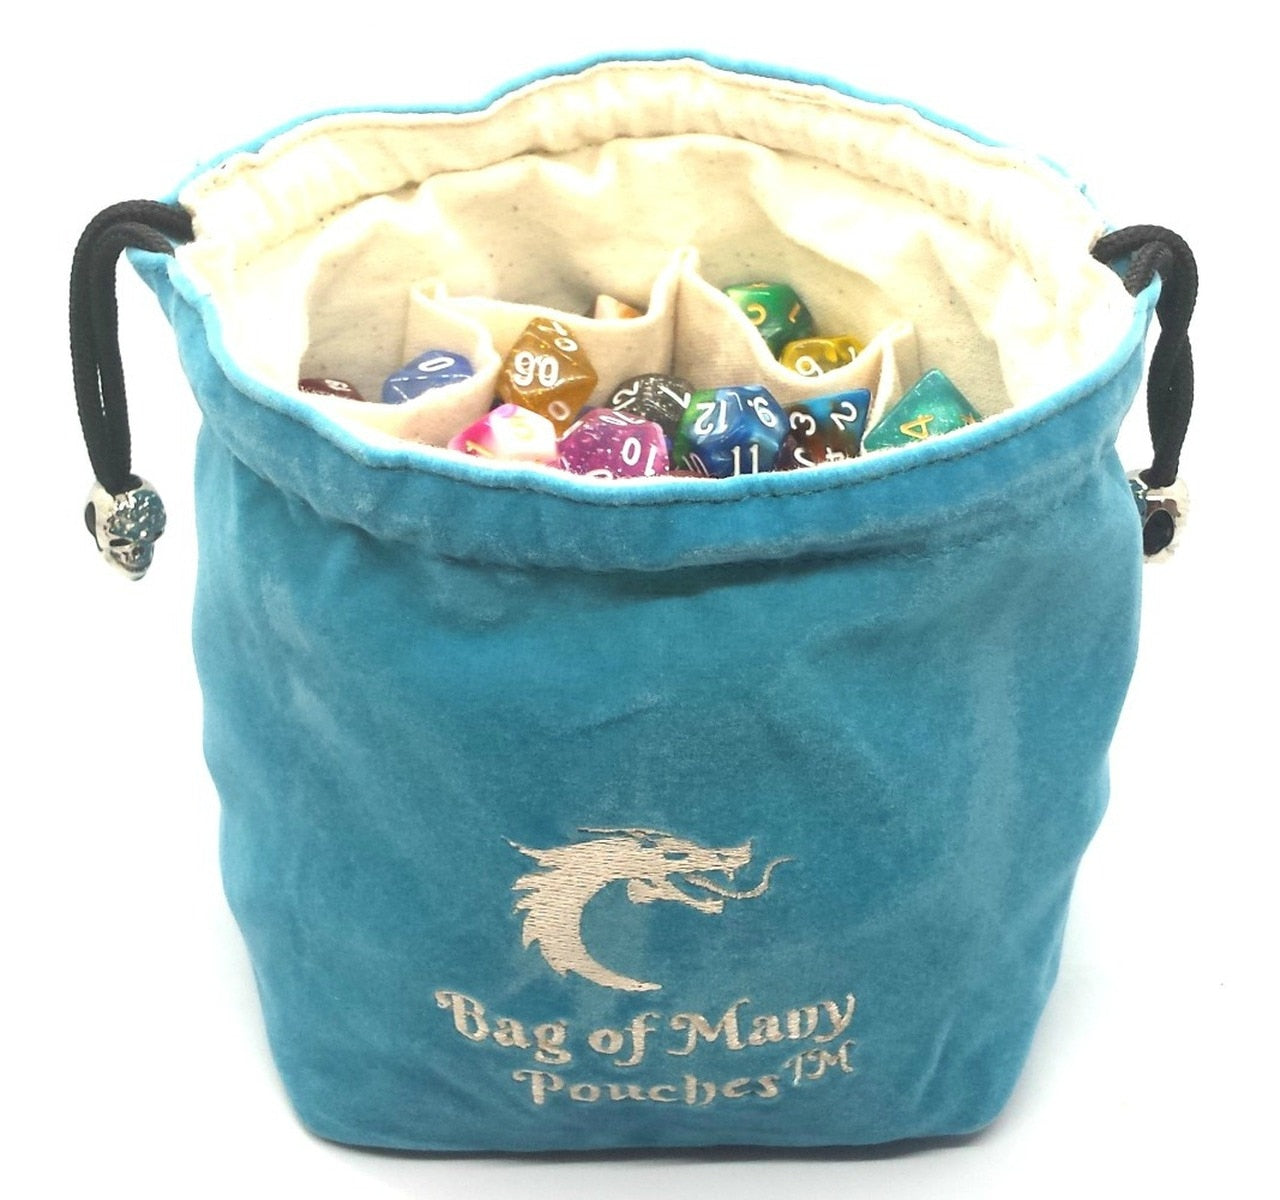 Bag of Many Pouches RPG D&D Dice Bag: Teal